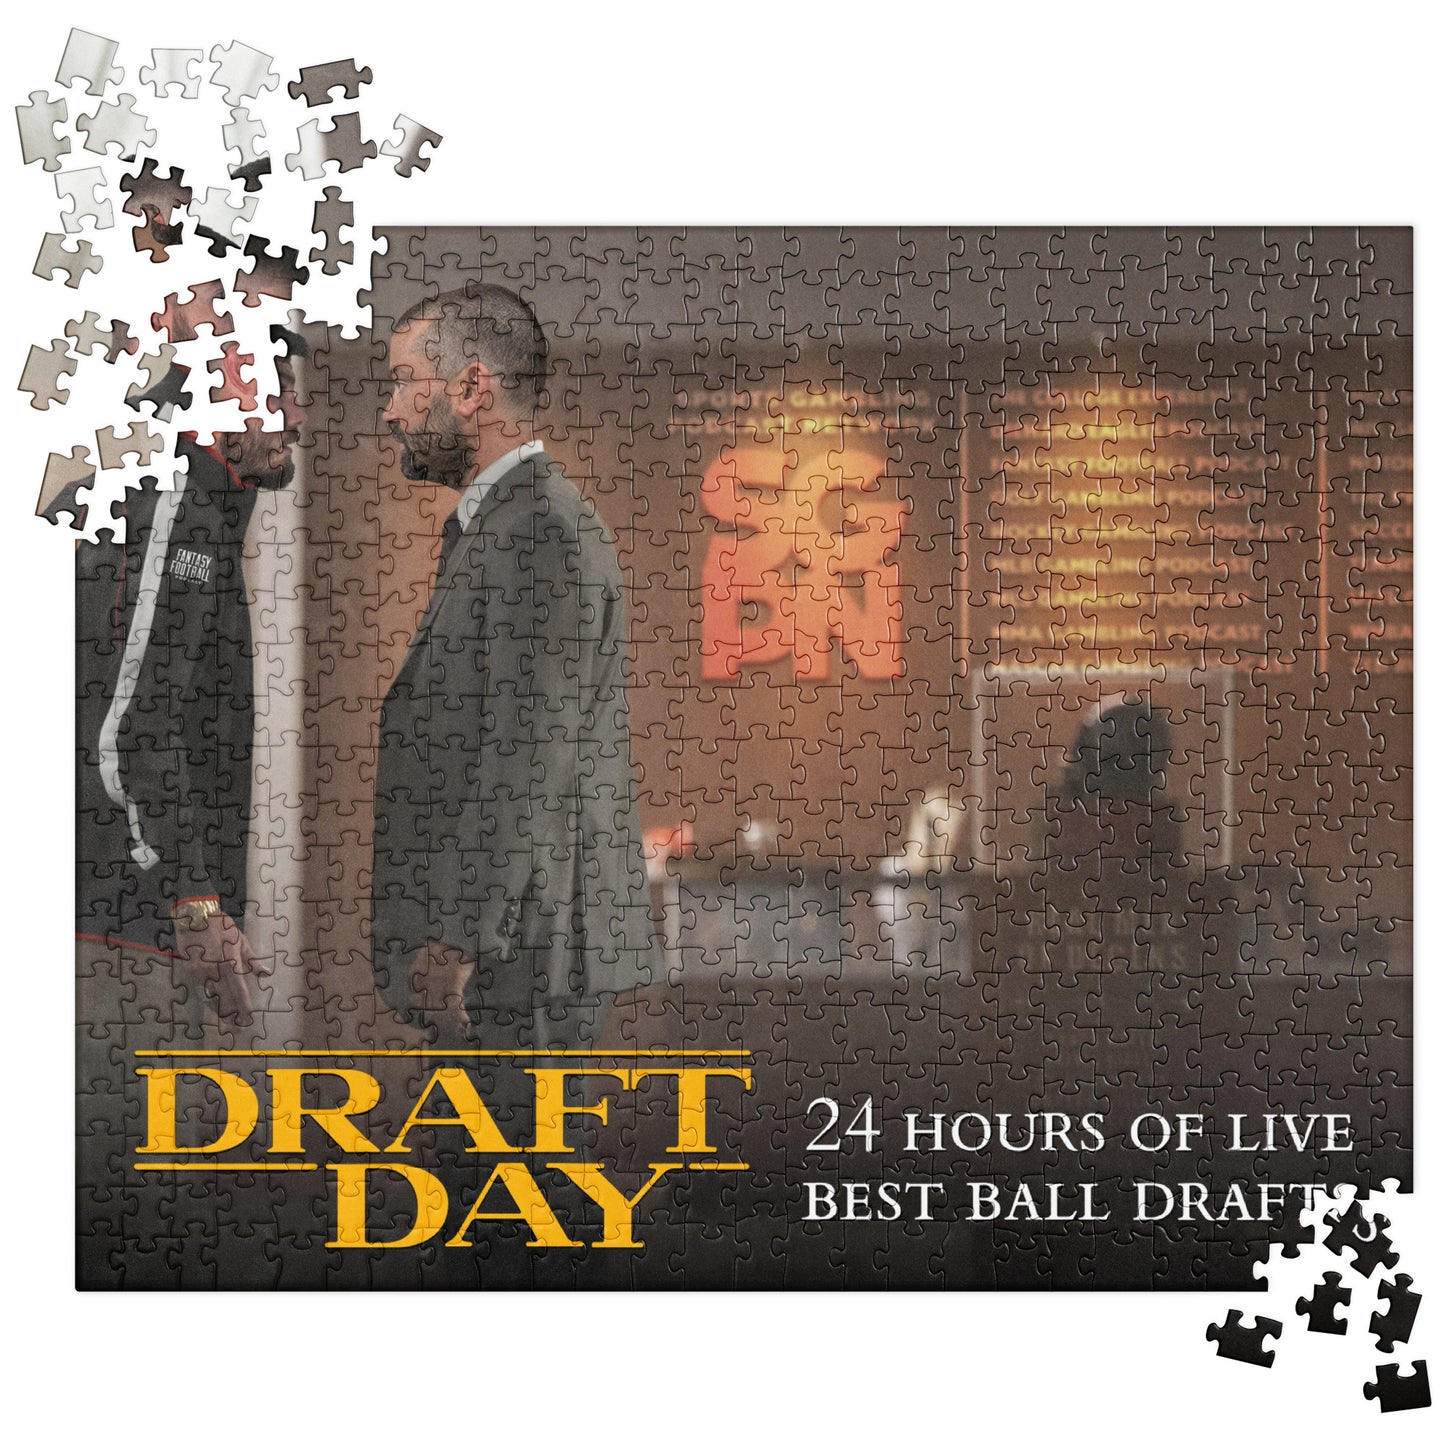 Draft Day 3: 24 Hours of Live Best Ball Drafts - Jigsaw puzzle